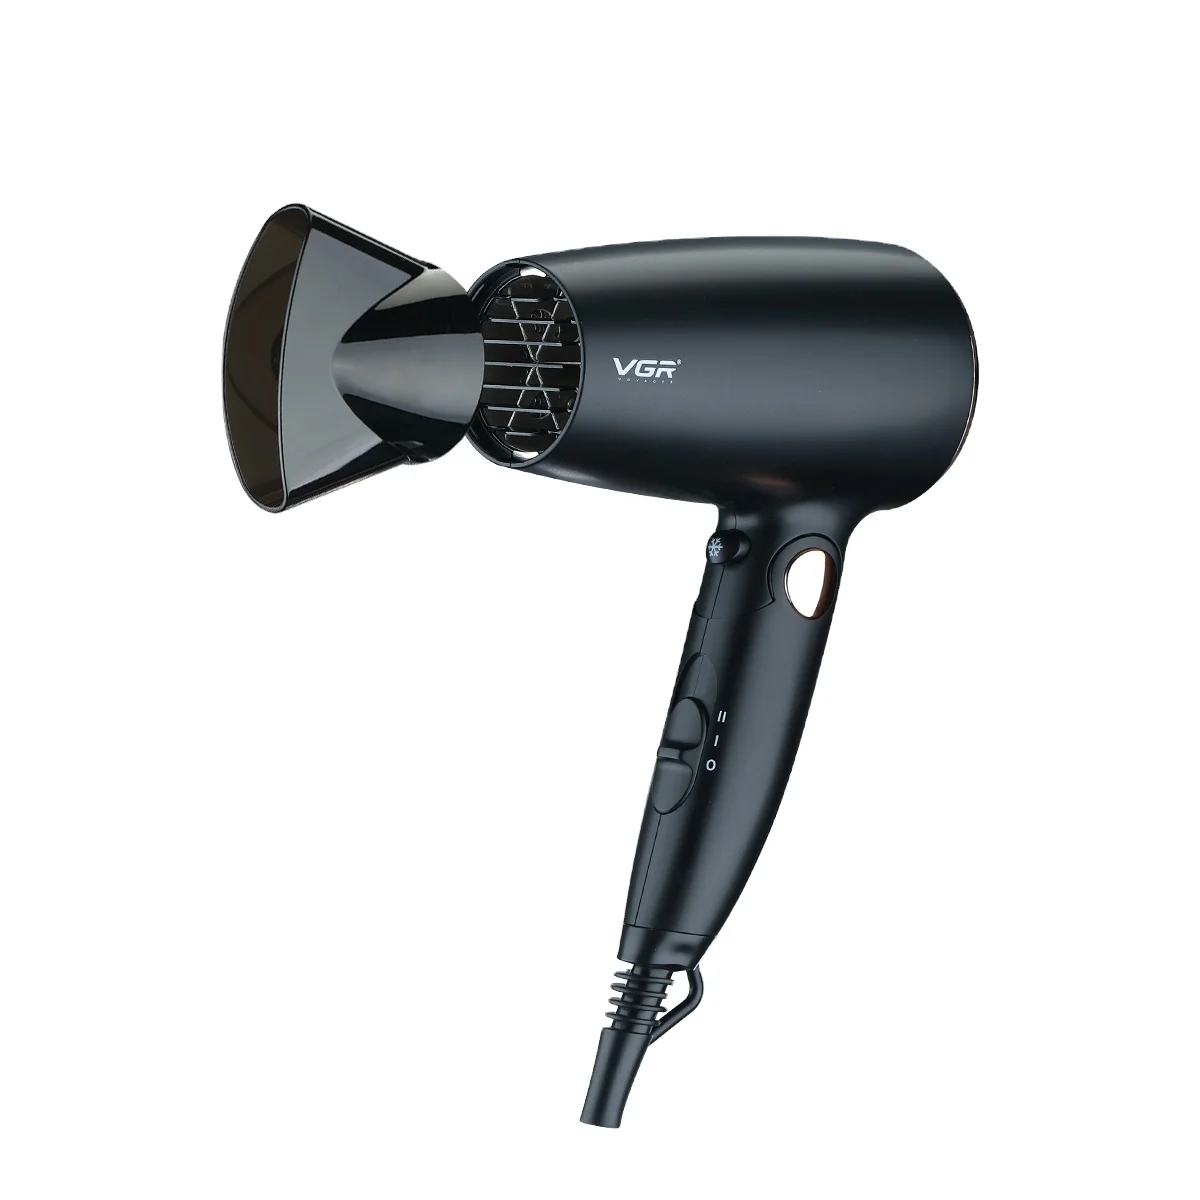 

VGR V-439 Powerful Motor DC Mini Low Noise Professional Fast Dry Electric Travel Hair Blow Dryer with Foldable Handle